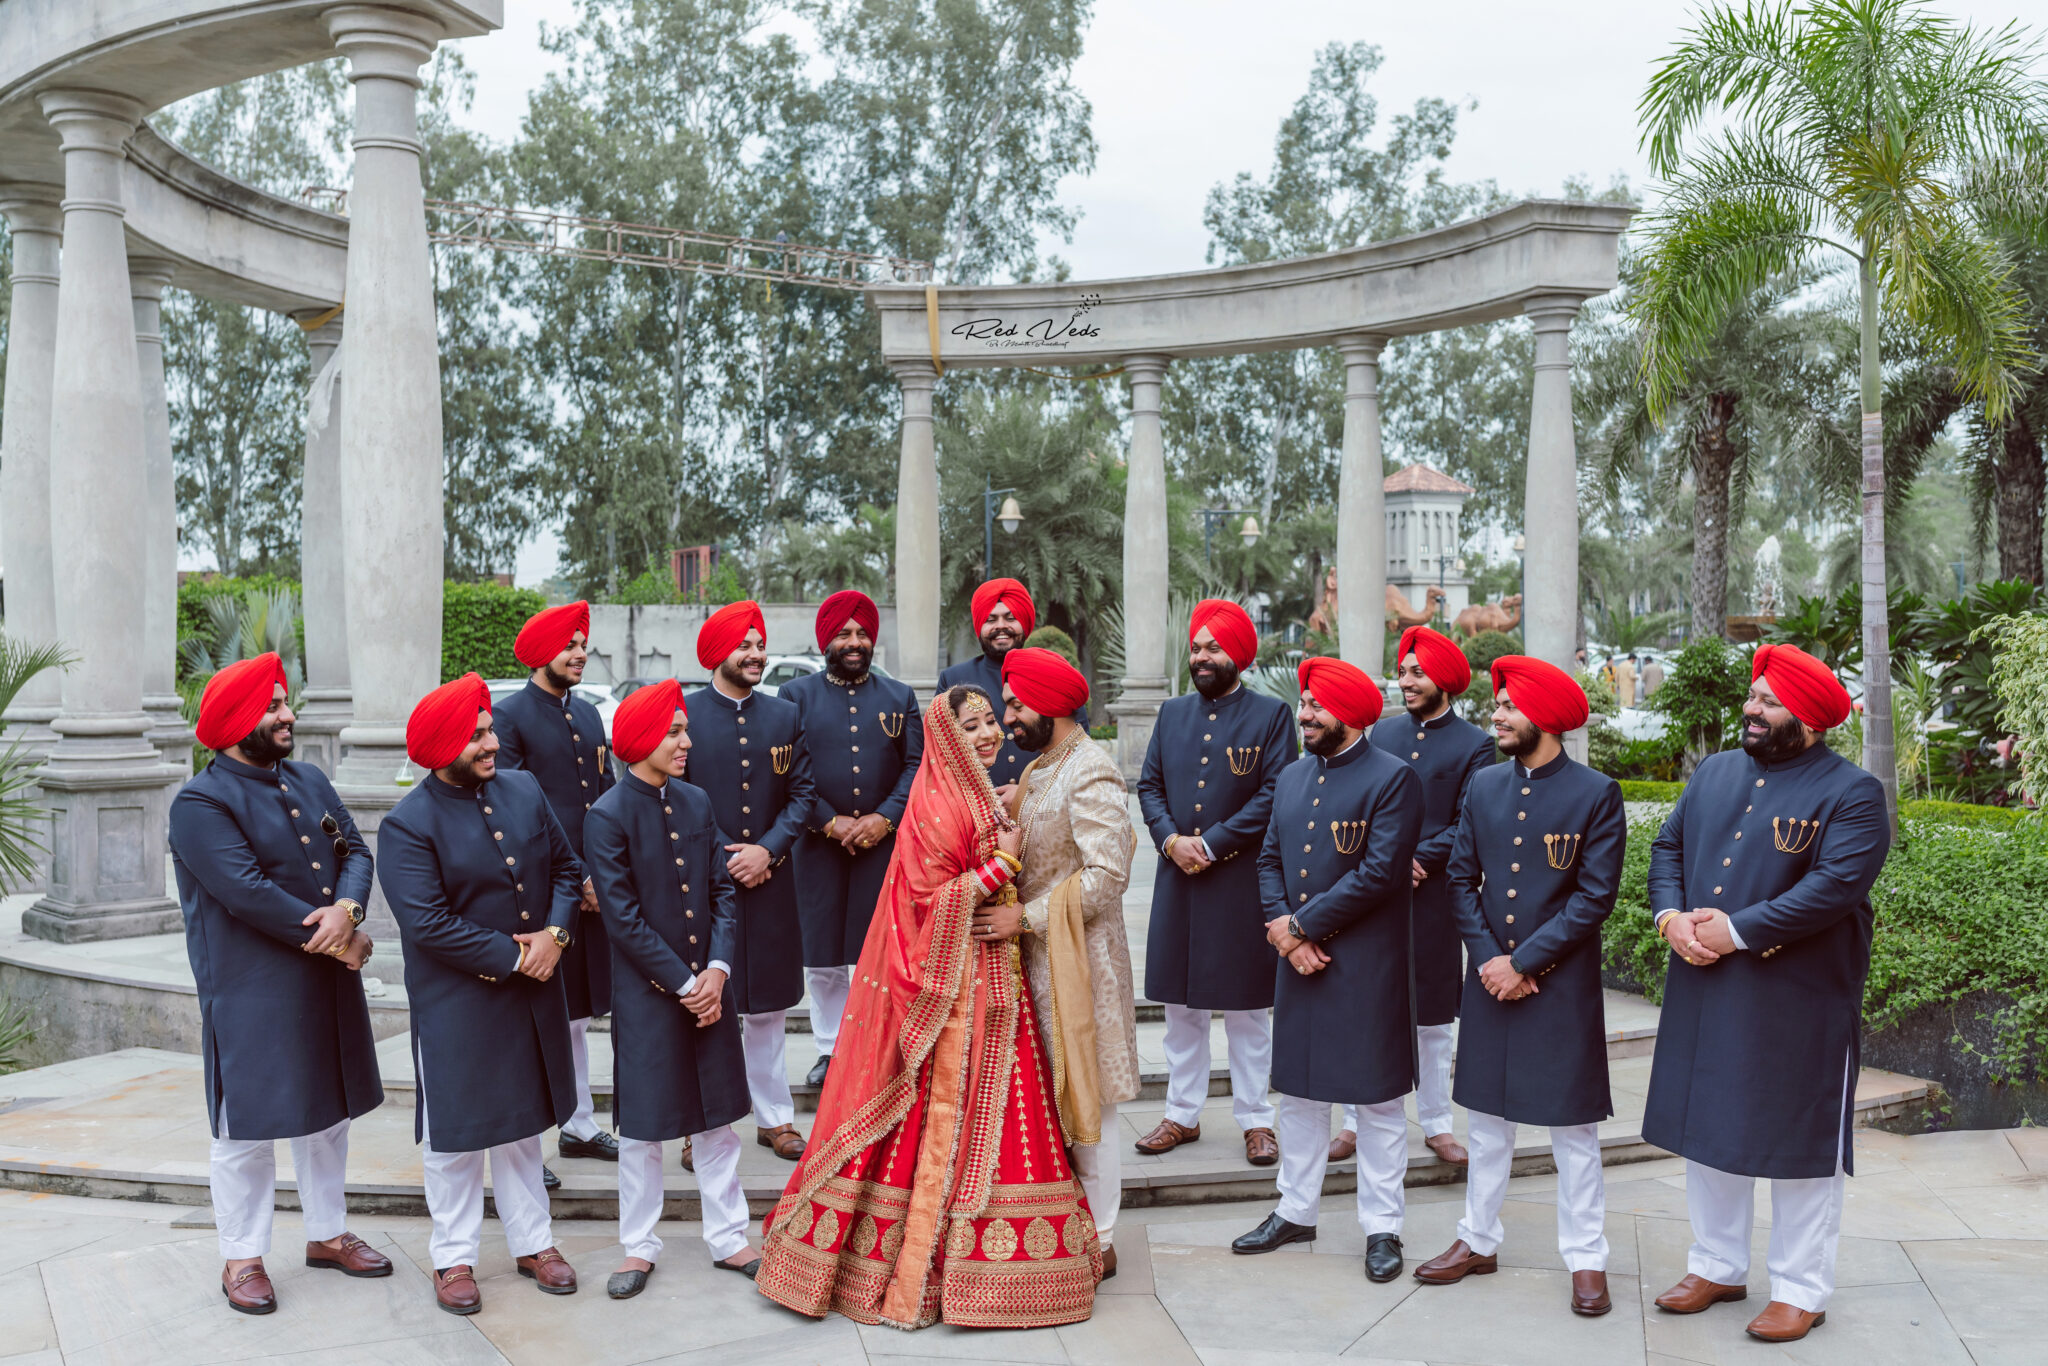 Red Veds: Capturing Stunning Indian Wedding Group Photo Poses